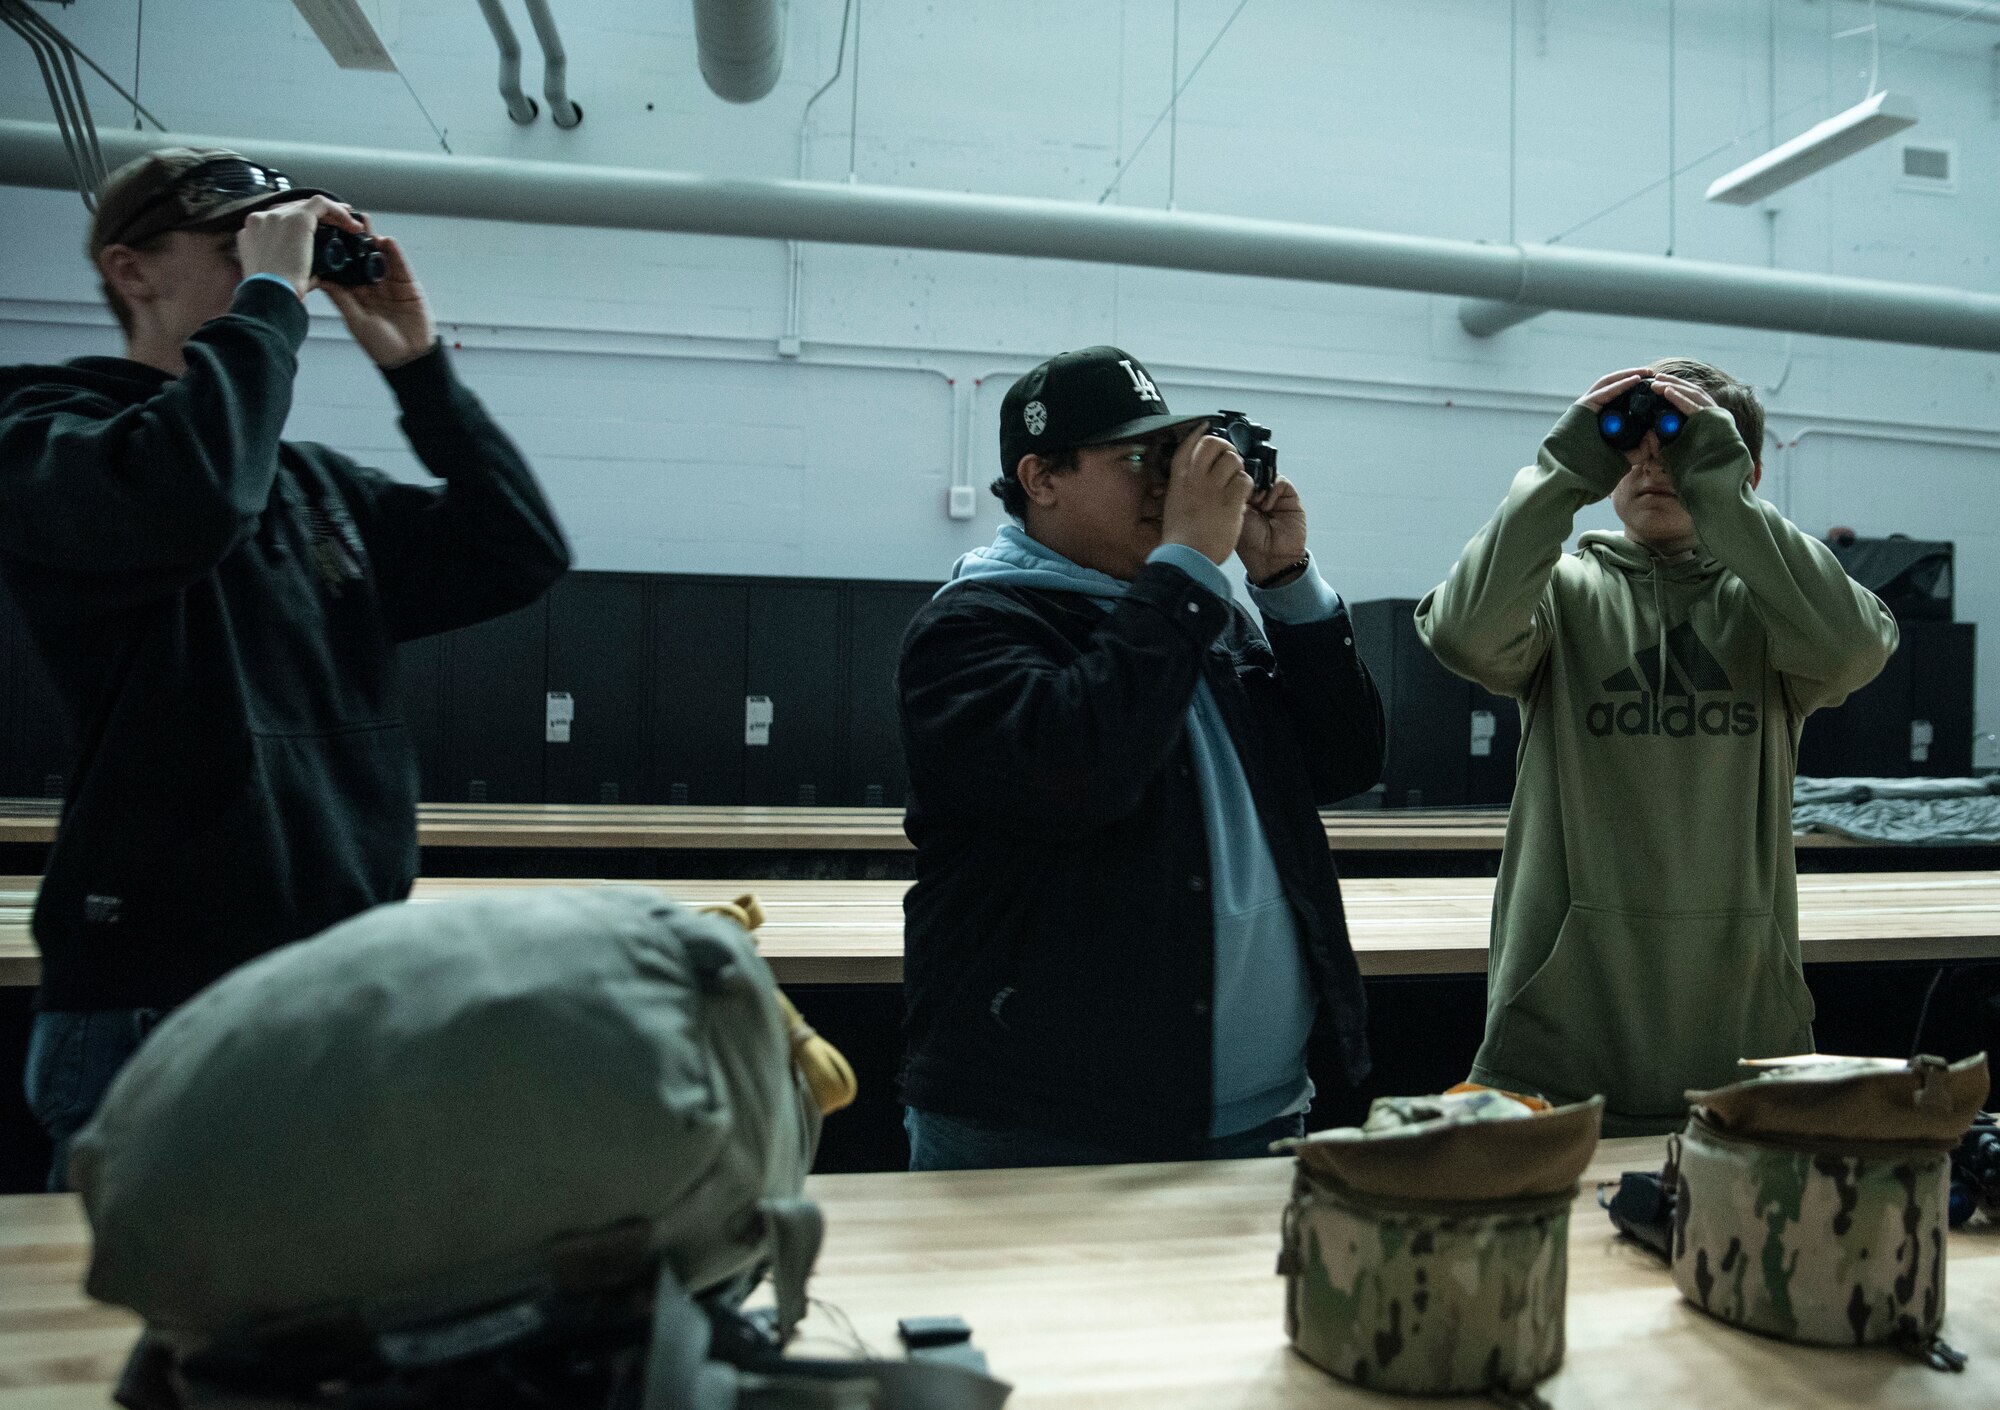 During their visit to the 62d Airlift Wing, the cadets learned about the mission of the 22nd Special Tactics Squadron and how other units from Team McChord assist them.